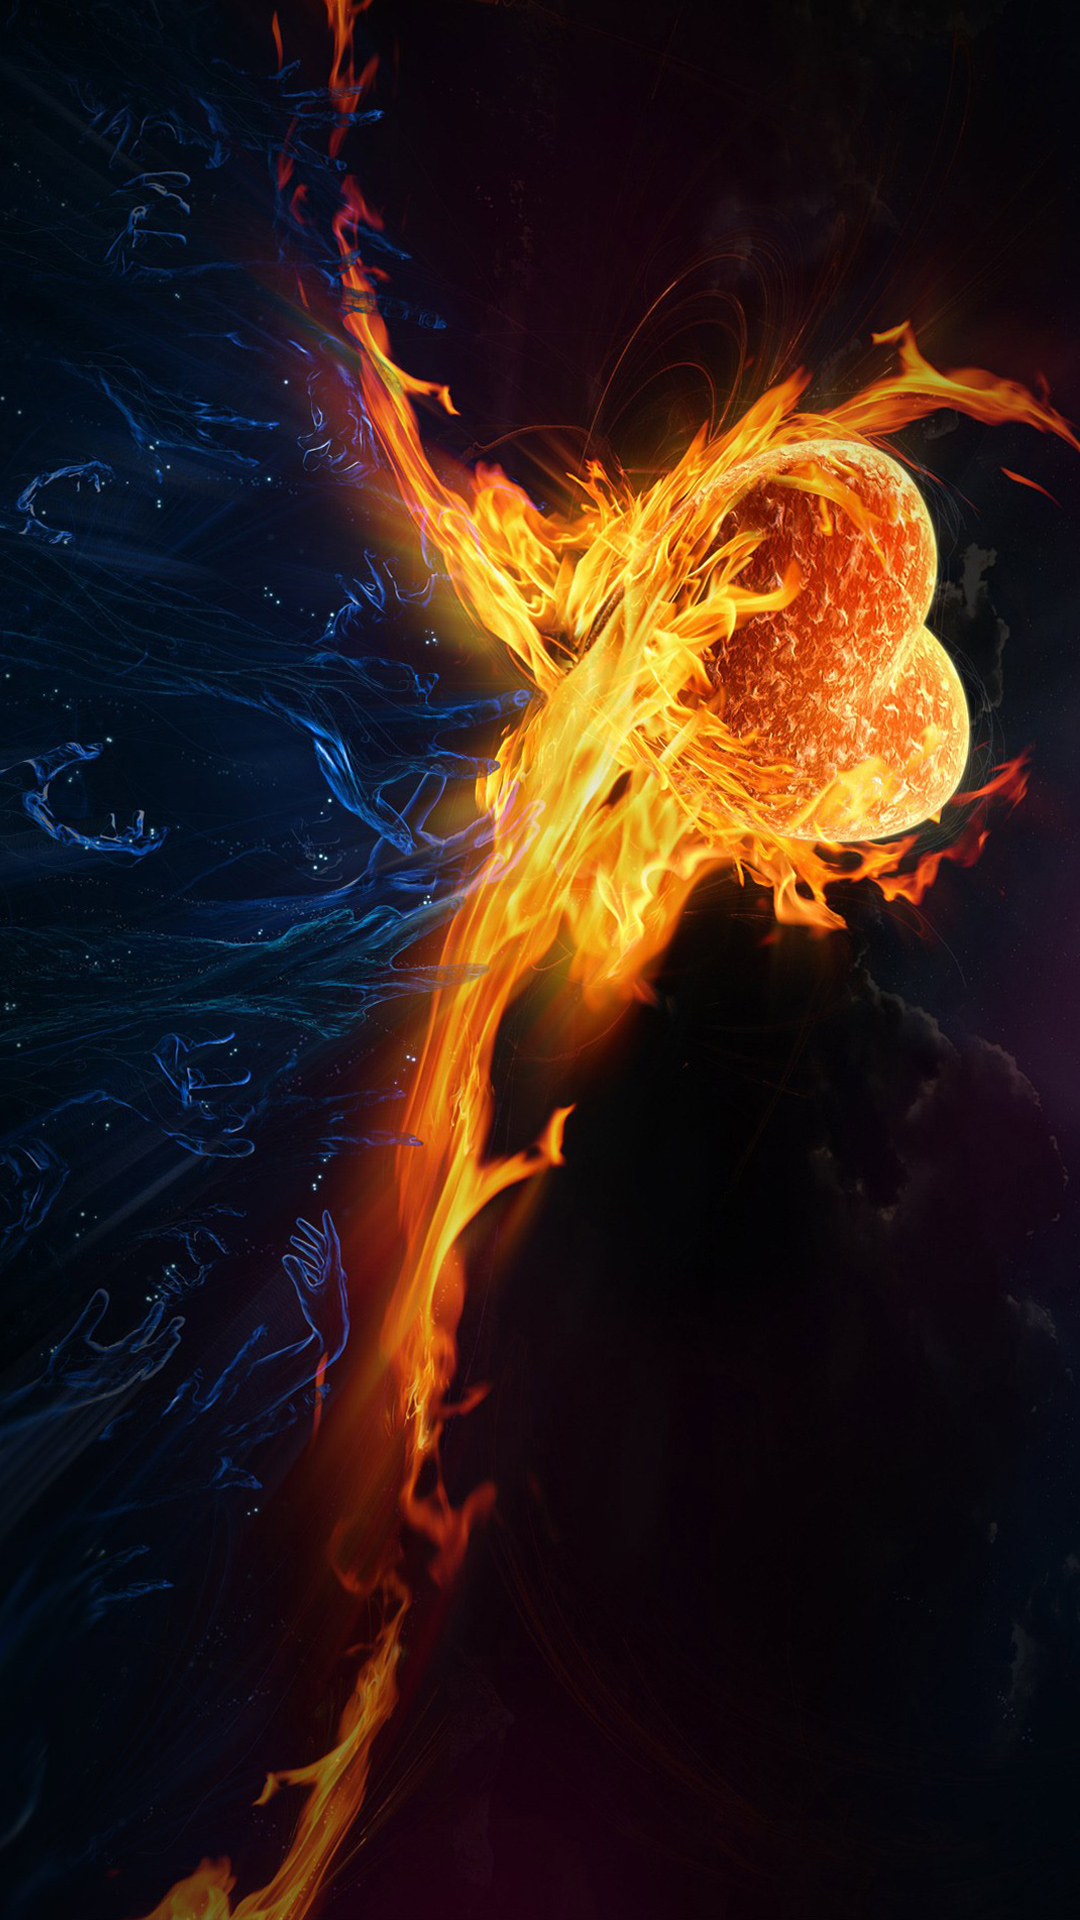 Fire Heart Abstract Full Hd Smartphone Wallpaper Gallery Yopriceville High Quality Images And Transparent Png Free Clipart